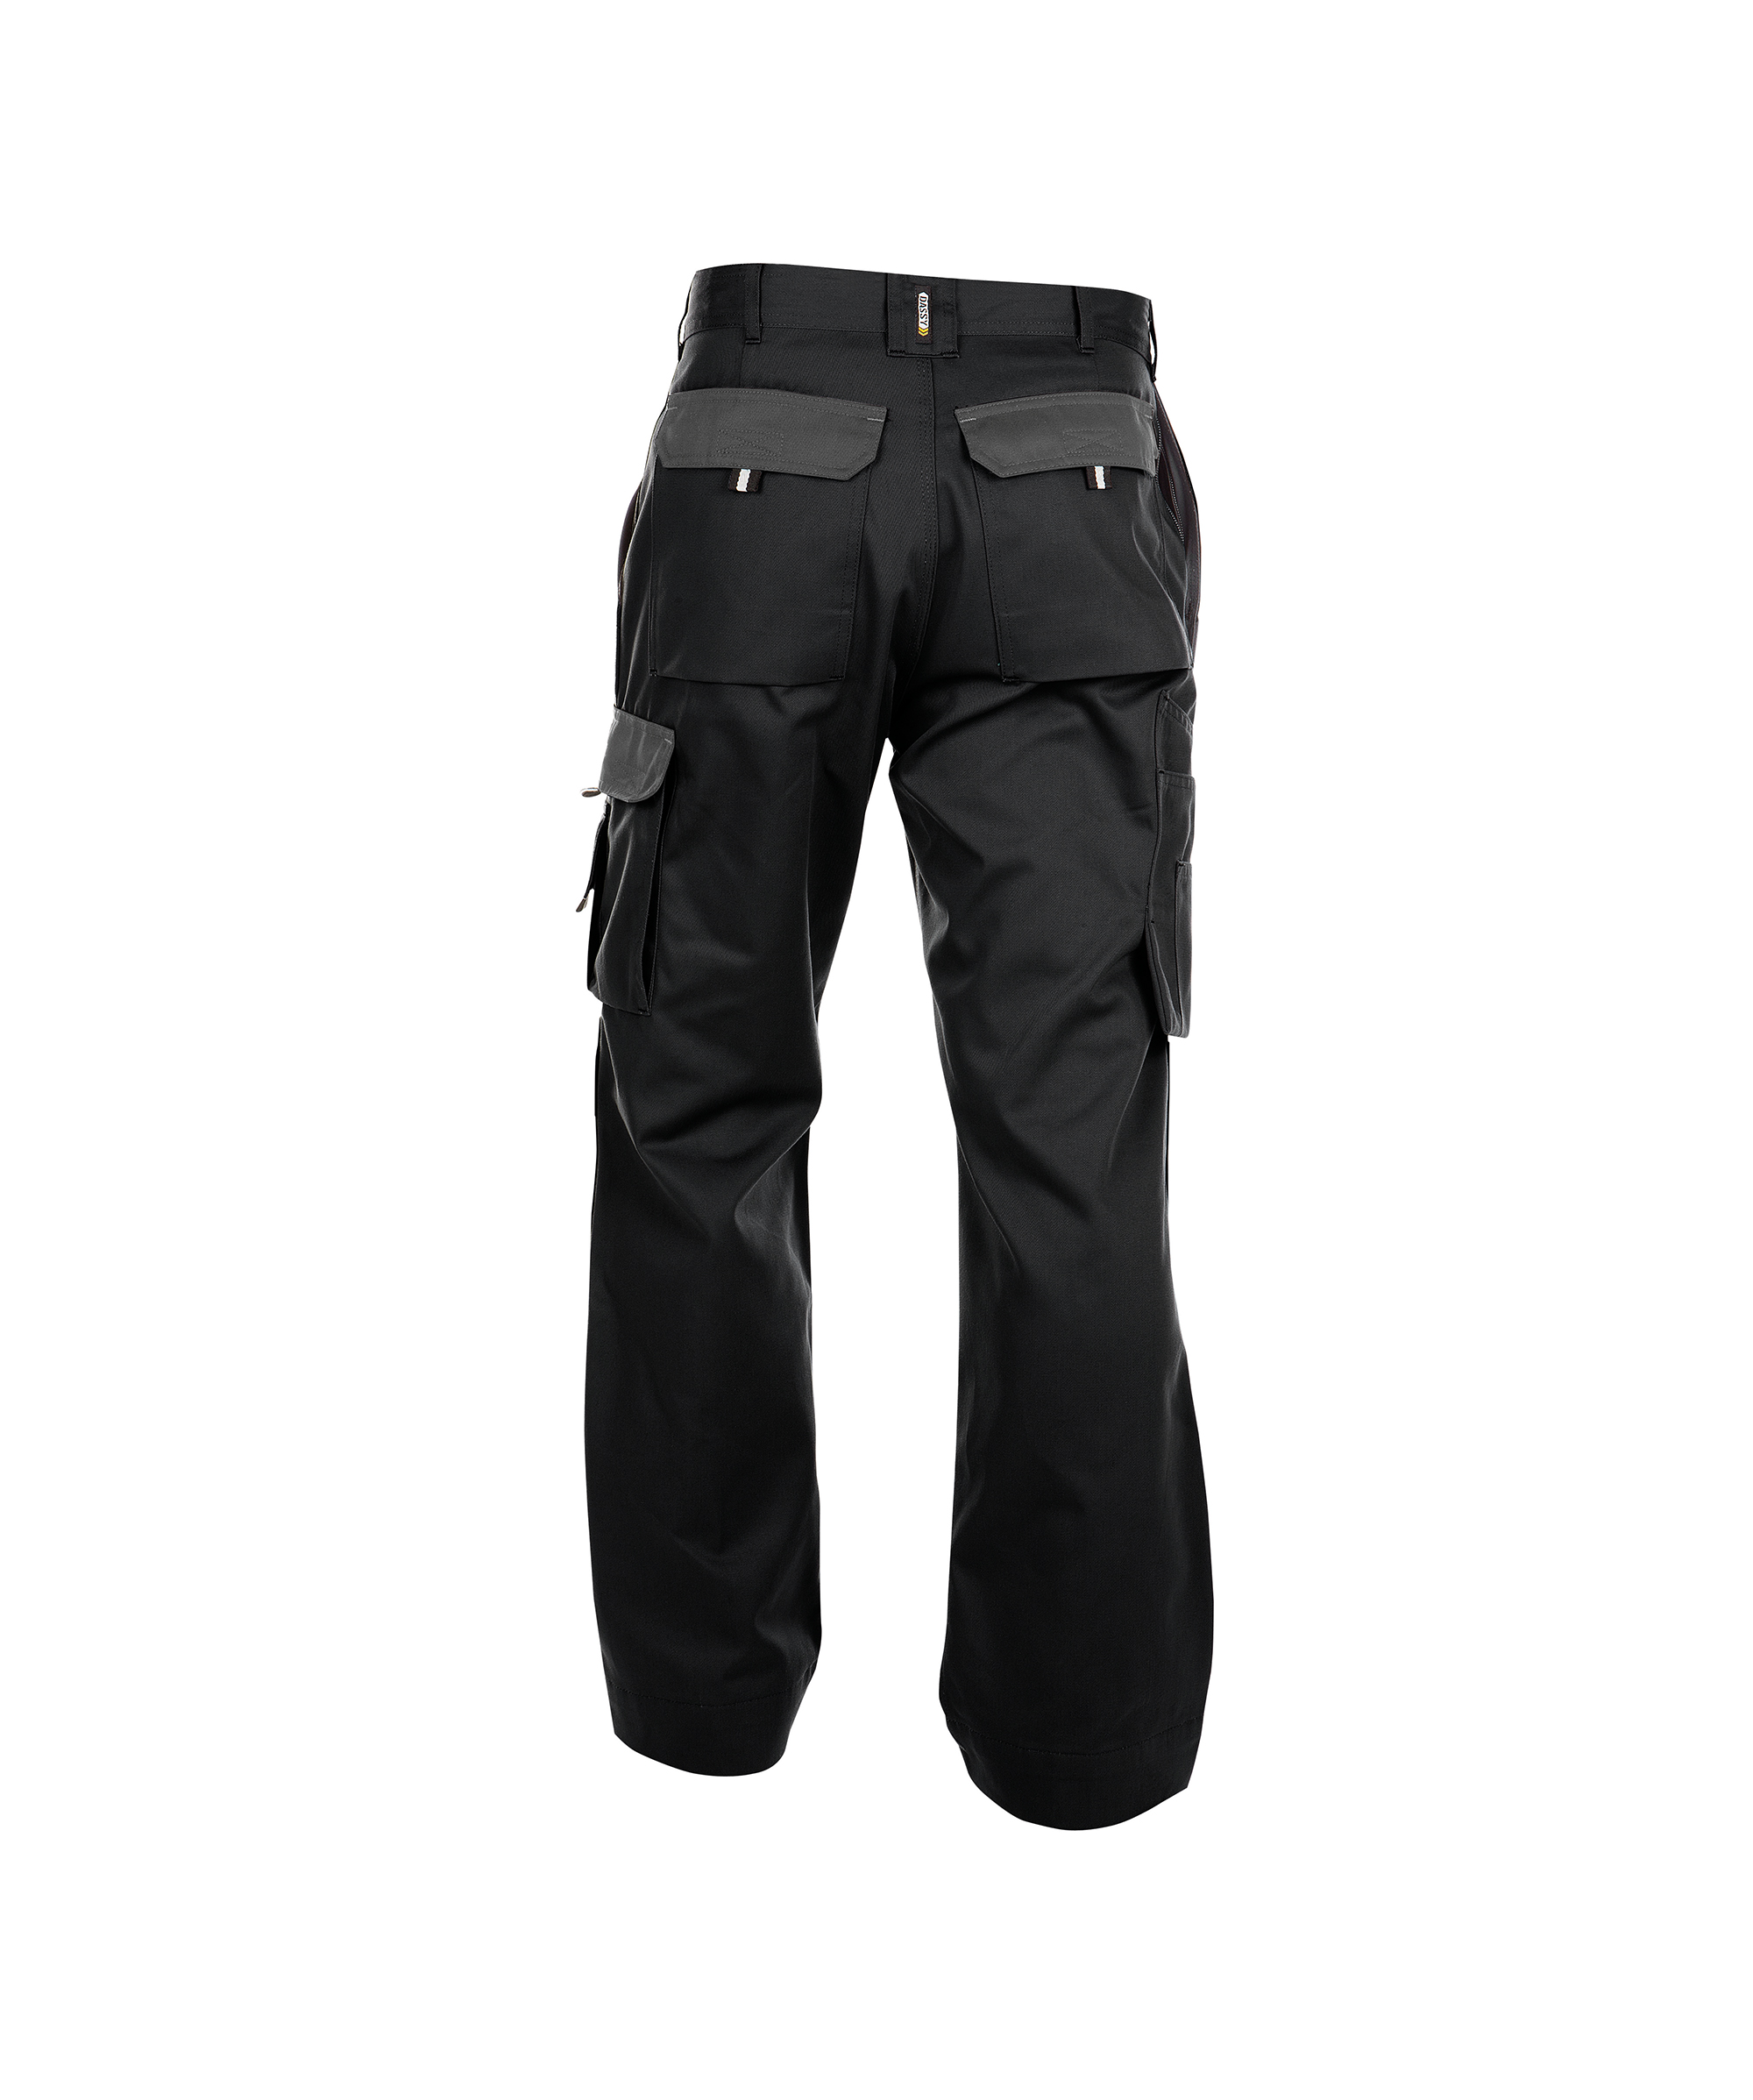 boston_two-tone-work-trousers-with-knee-pockets_black-cement-grey_back.jpg